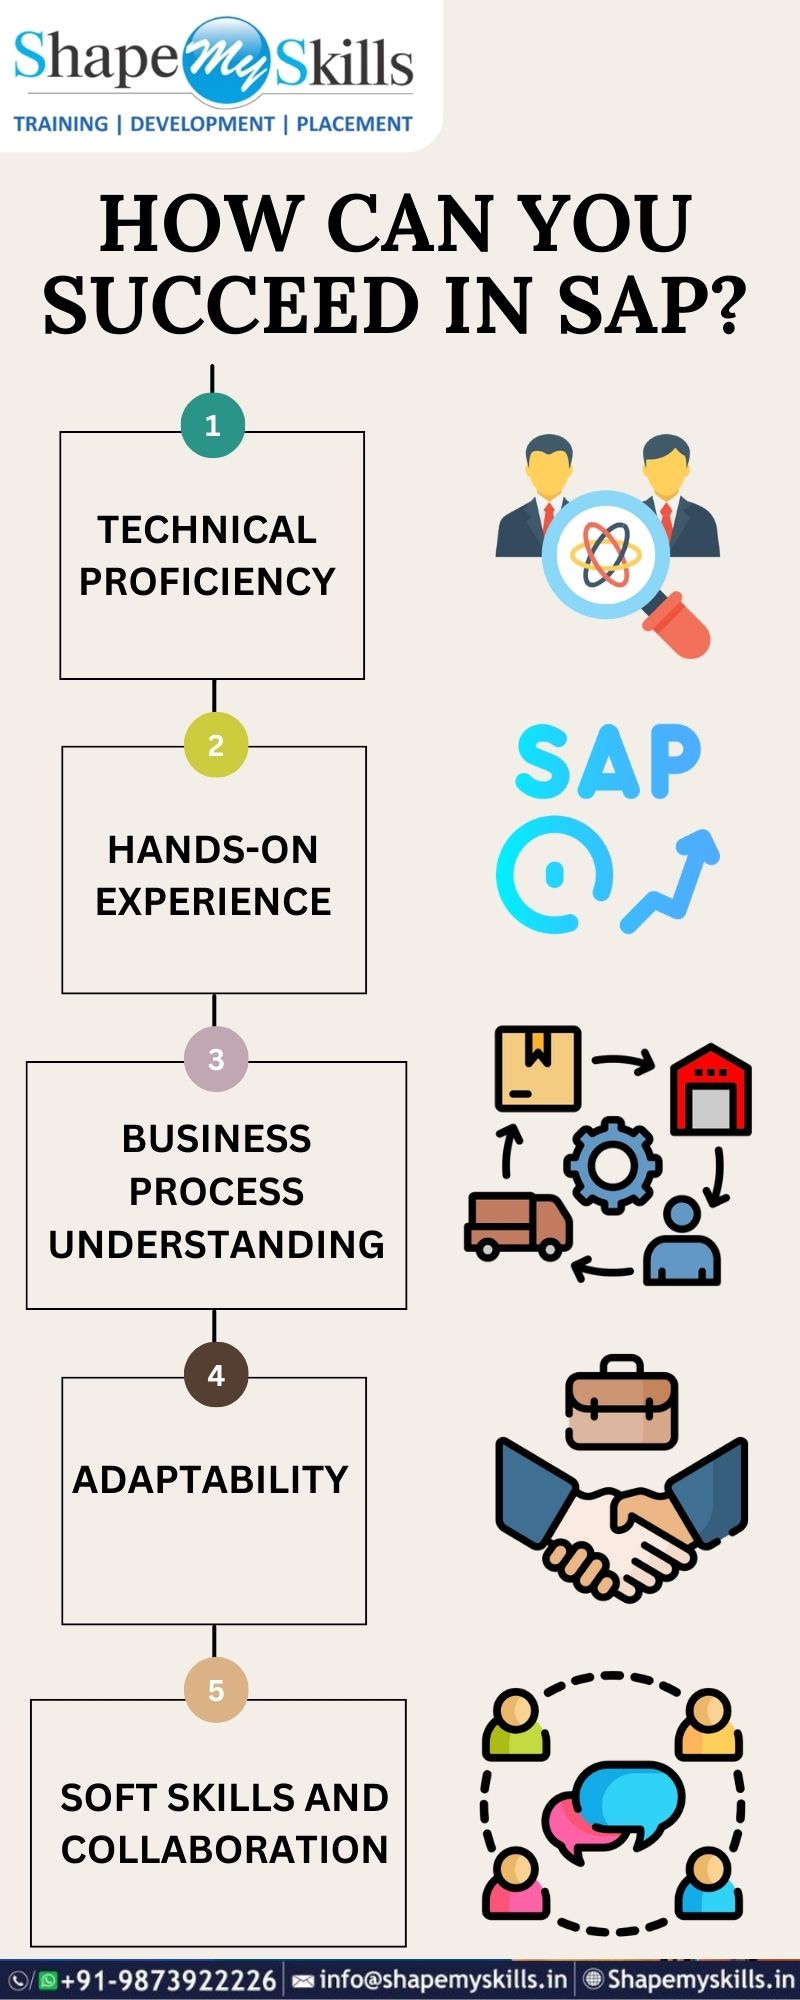 How Can You Succeed In SAP